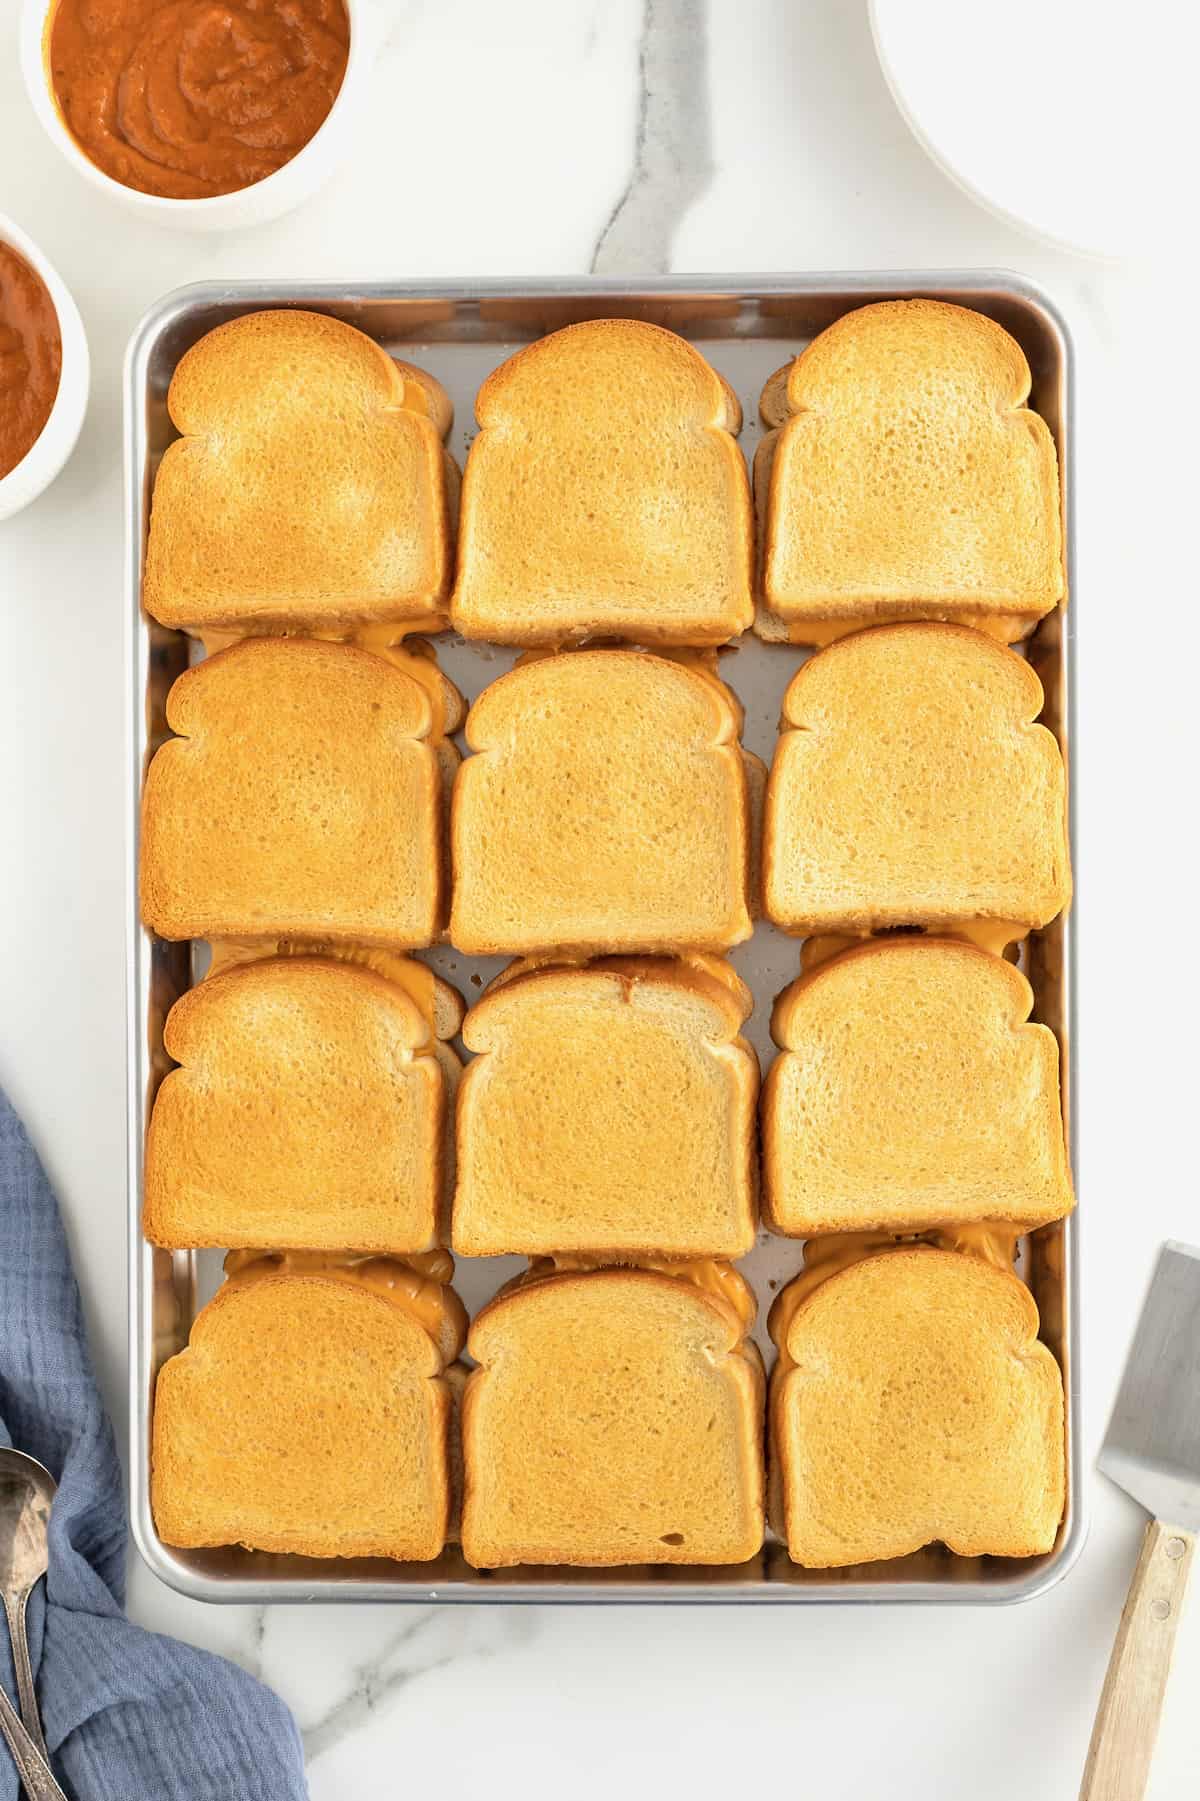 Sheet Pan Grilled Cheese Sandwiches by The BakerMama